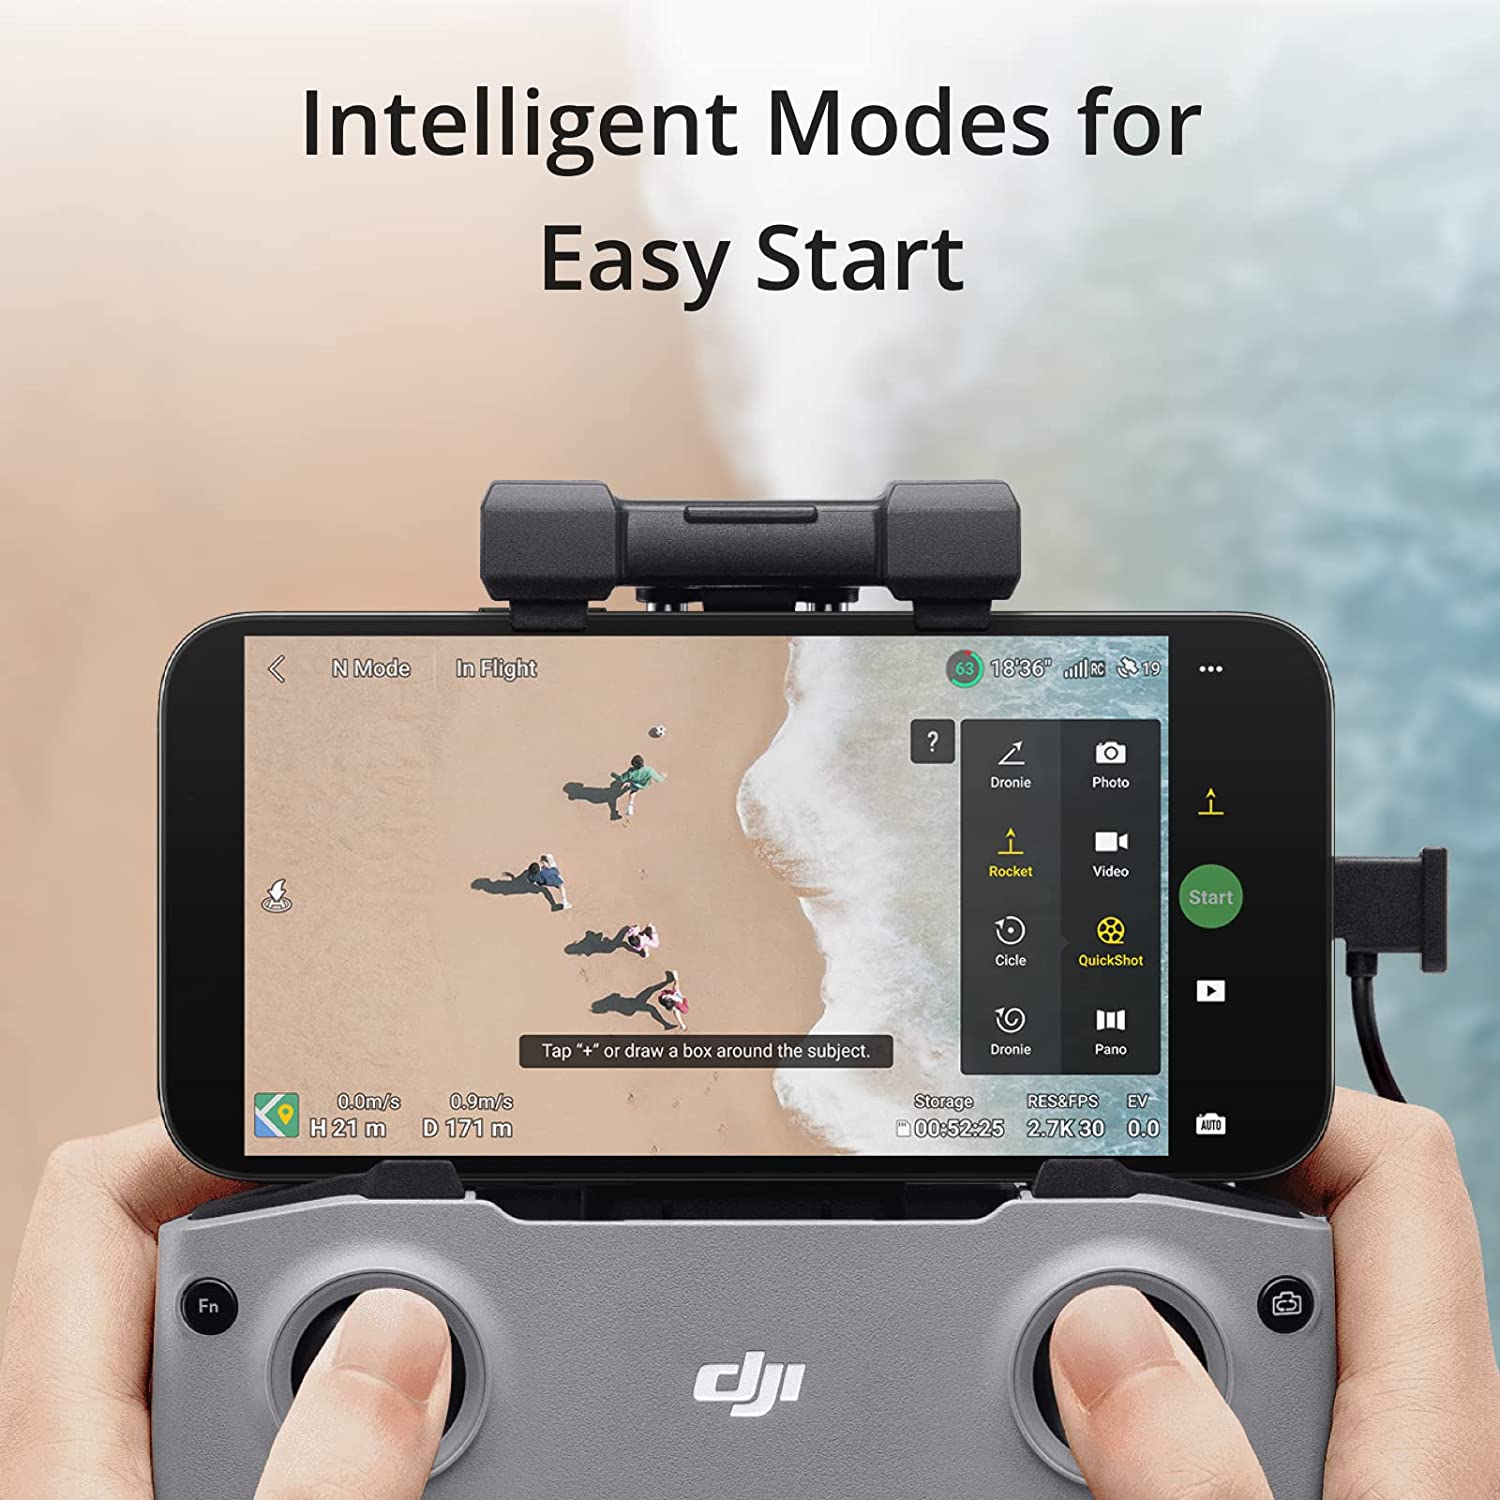 CLEARANCE DJI Mini 2 SE Fly More Combo, Lightweight and Foldable Mini Camera Drone with 2.7K Video